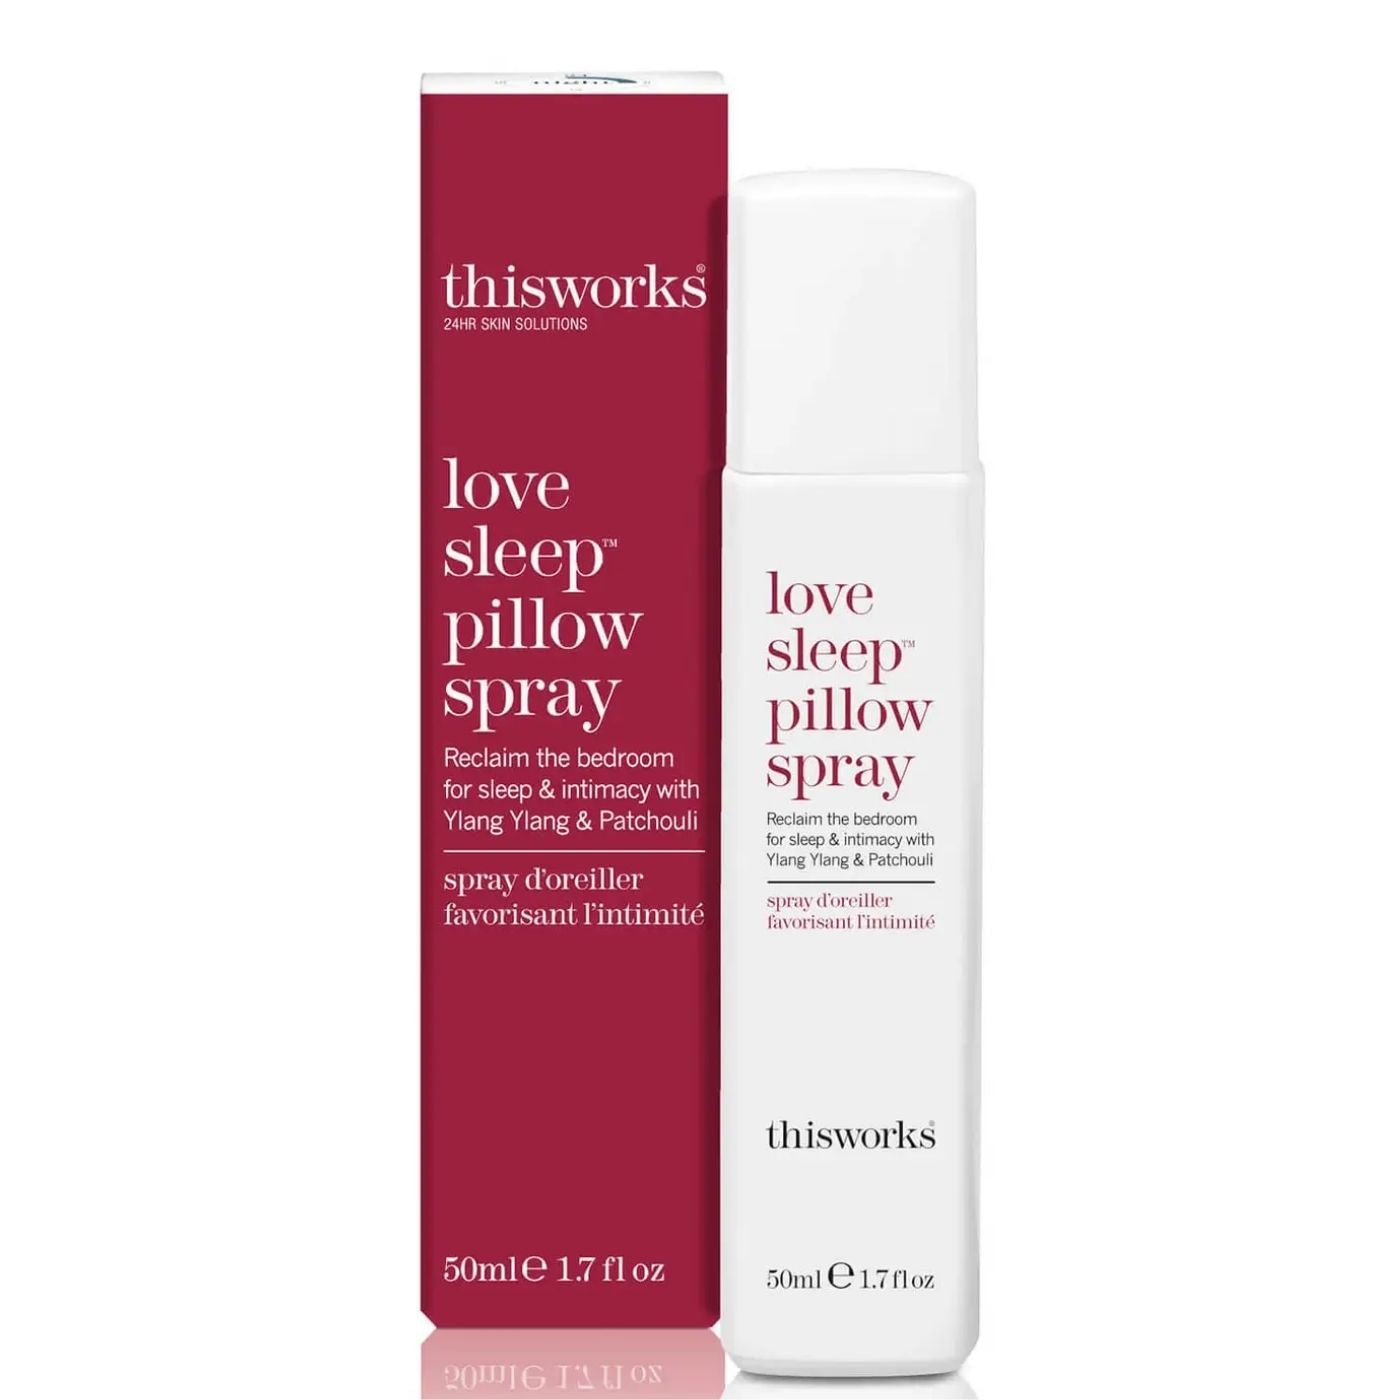 This Works this works | Love Sleep Pillow Spray | 50ml - SkinShop